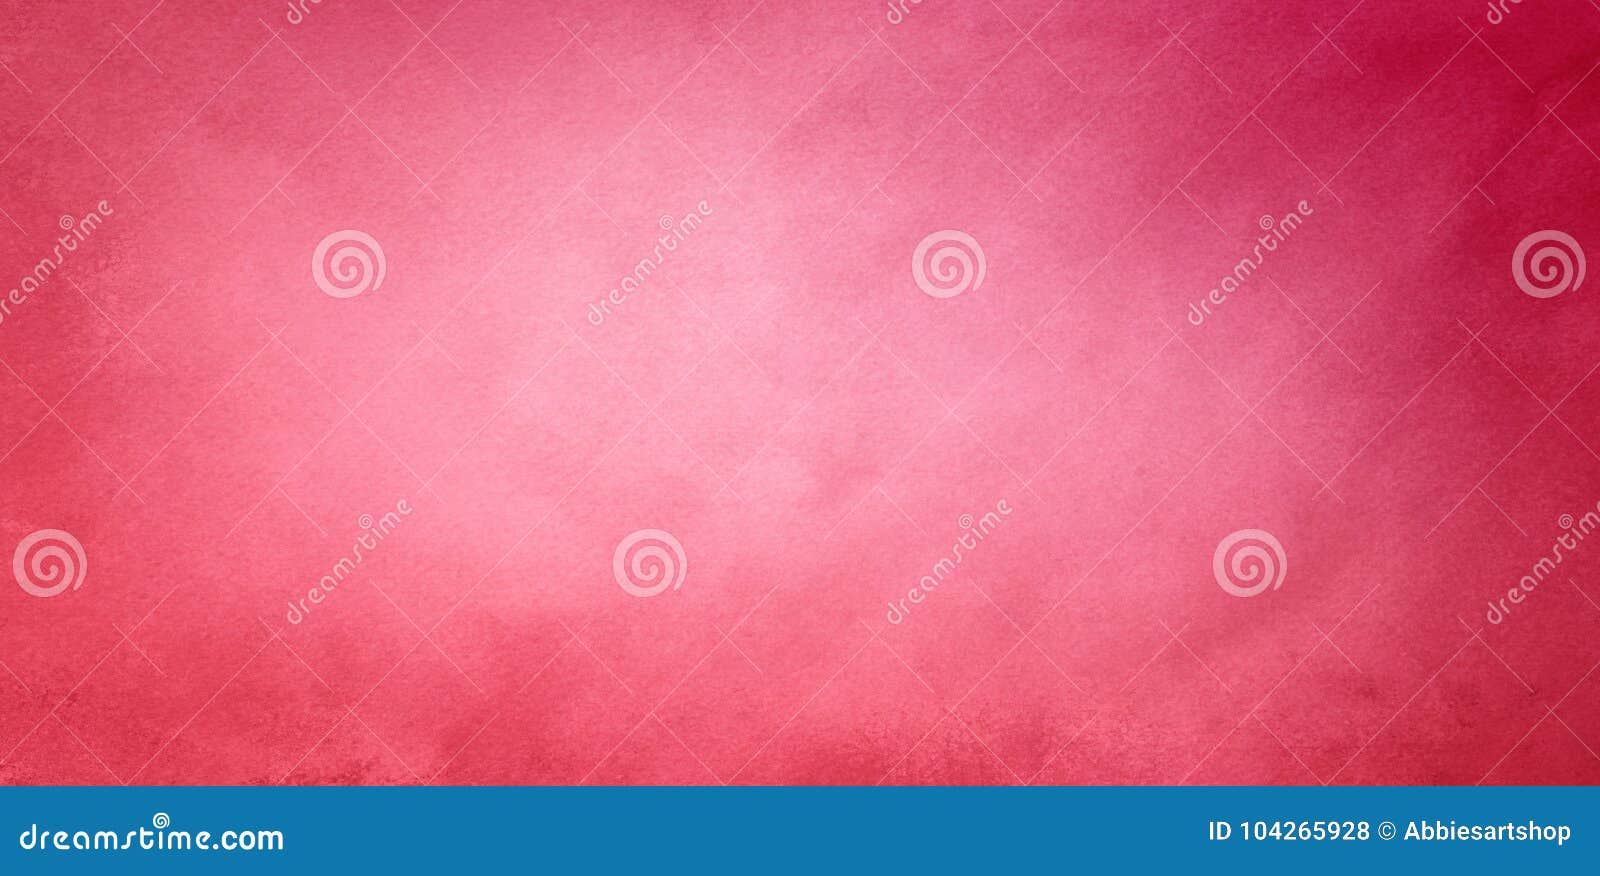 pretty pink background in soft burgundy mauve and rose pink colors with vintage texture